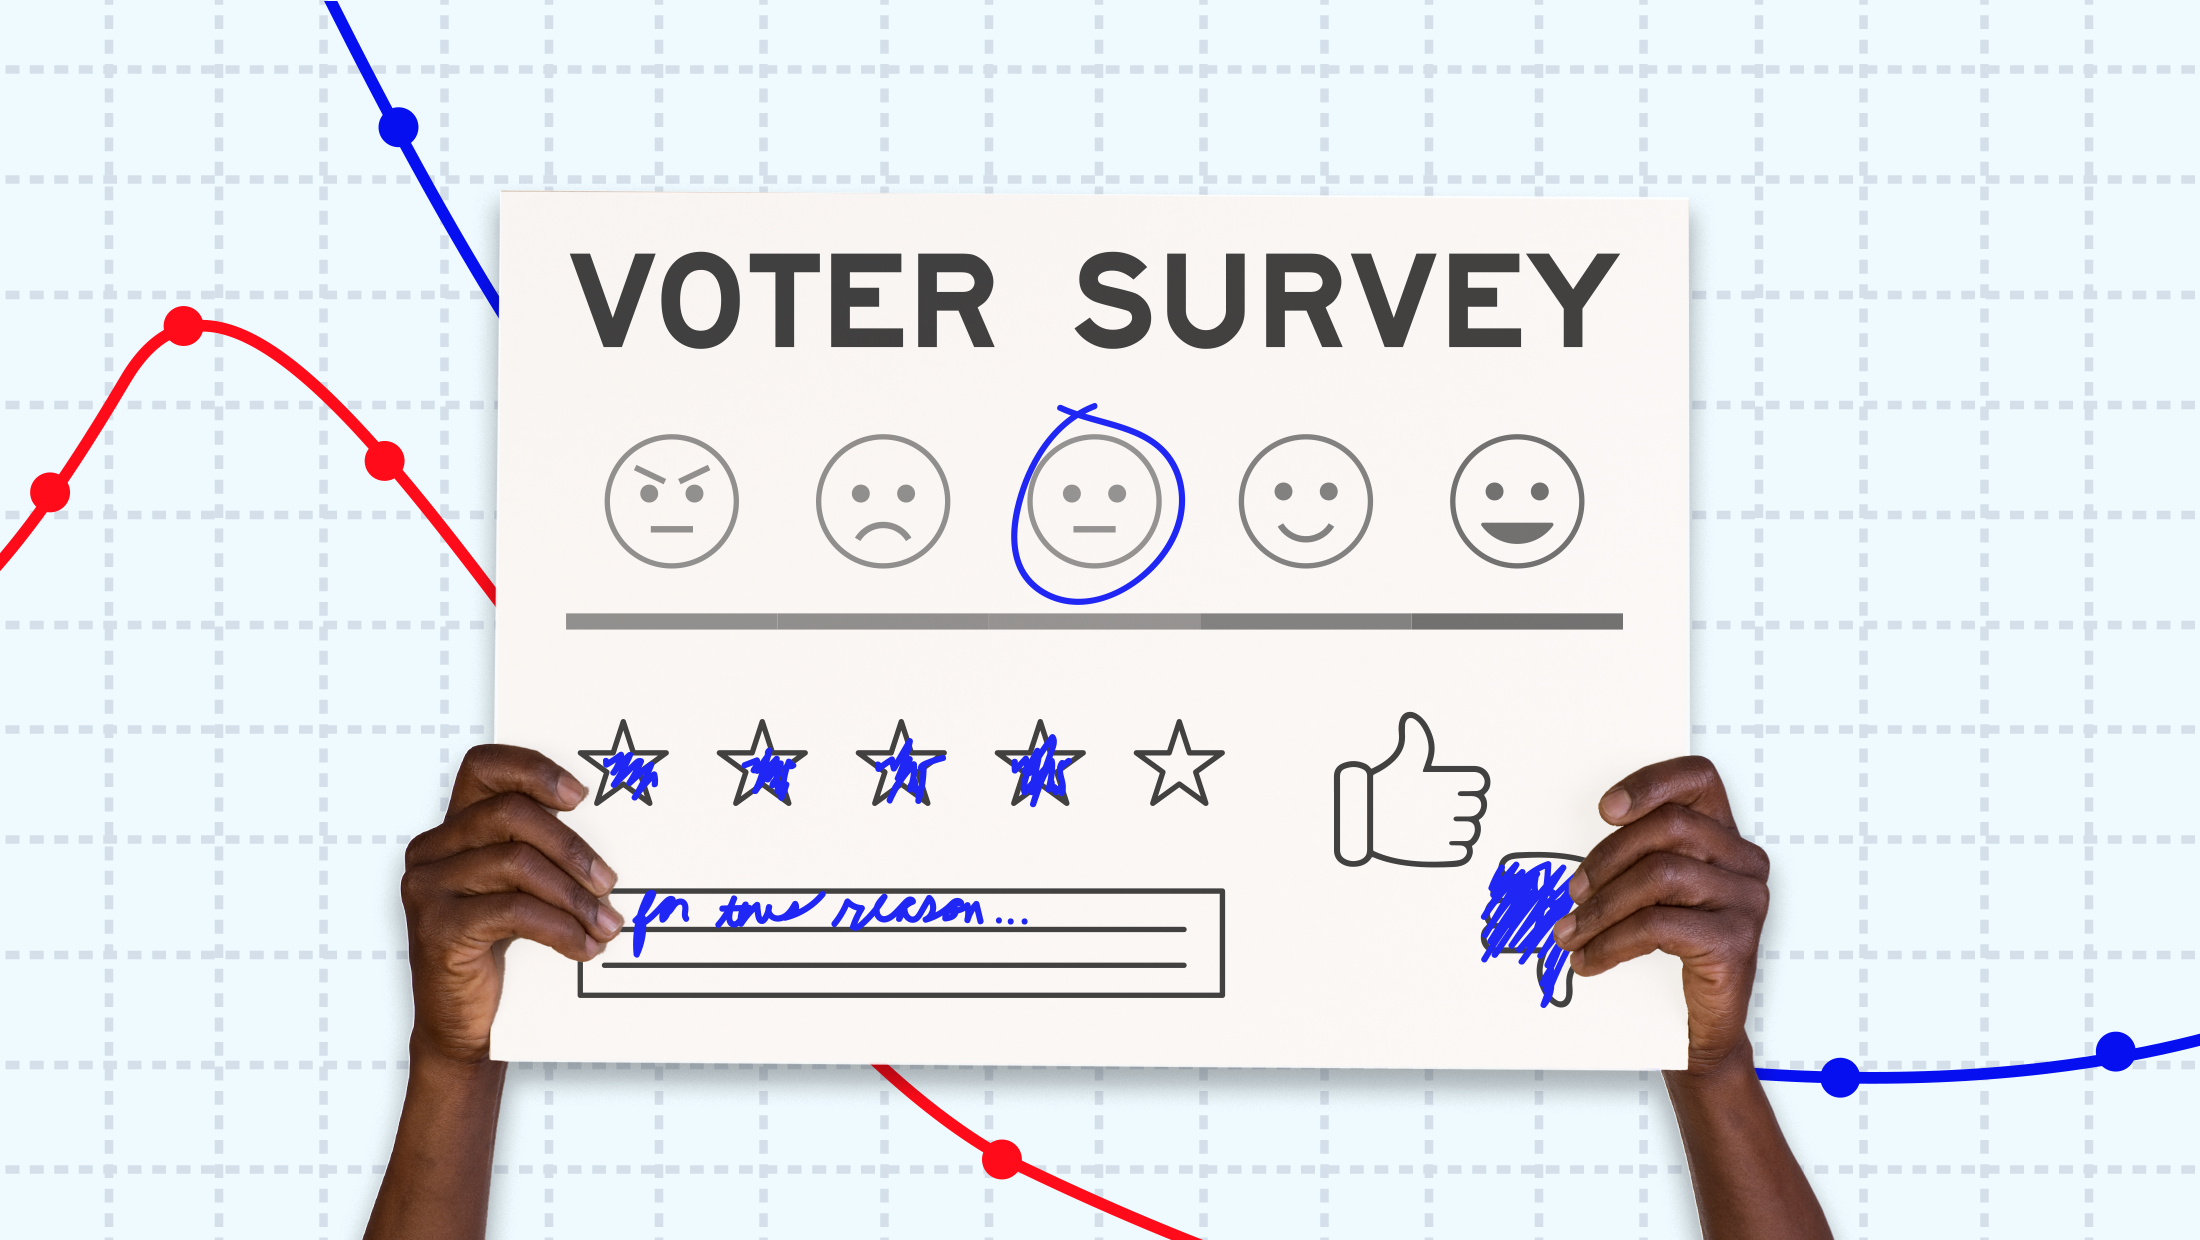 A pair of hands holding up a sign that says "VOTER SURVEY" featuring a range of smiley faces and other ways to measure voter satisifcation levels, mounted on a piece of graph paper with various data points